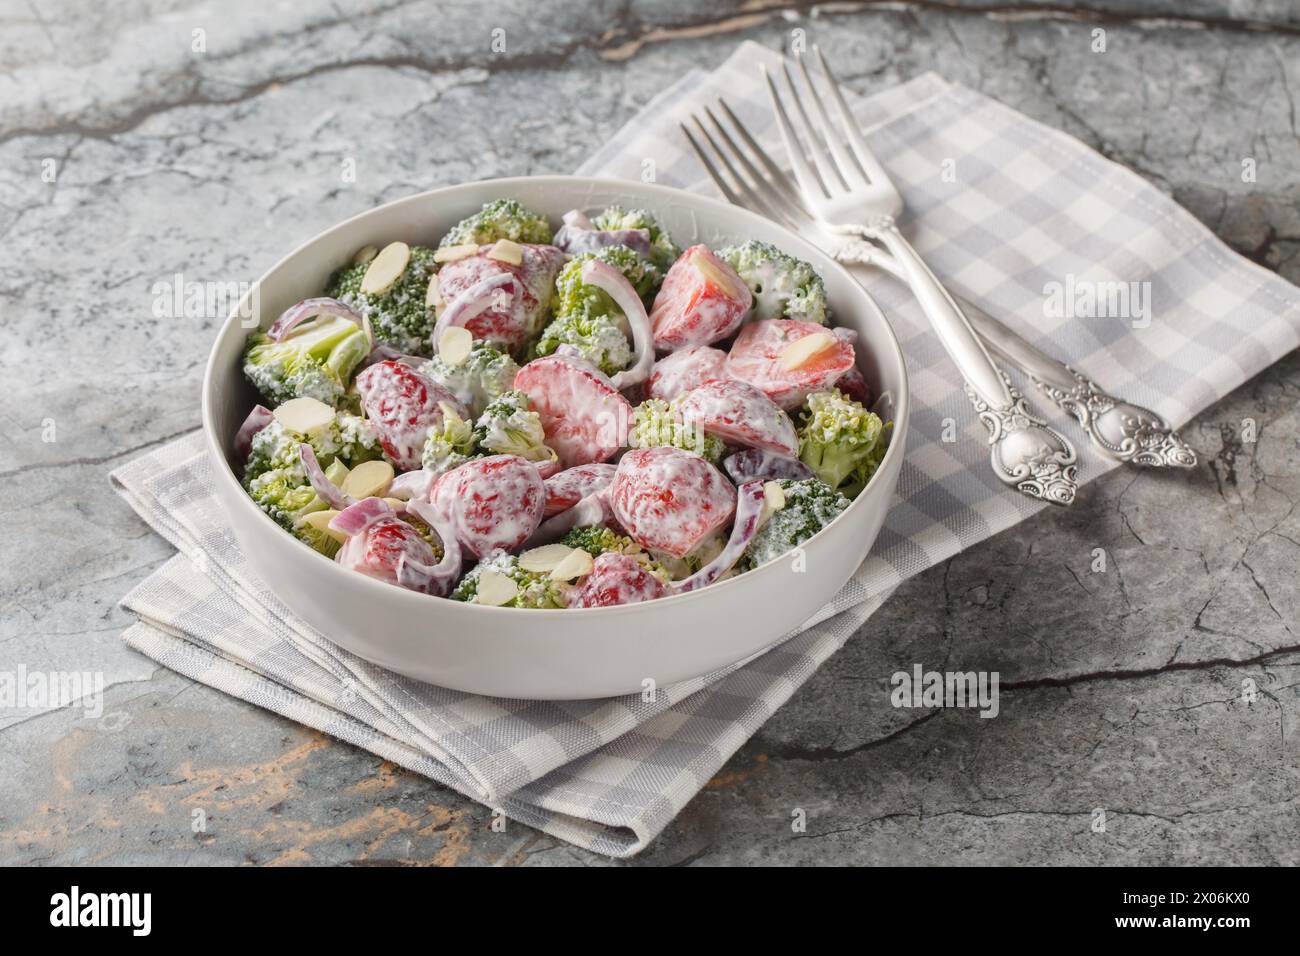 Broccoli salad with fresh strawberries, red onion, almonds and Greek yogurt close-up in a plate on the table. Horizontal Stock Photo